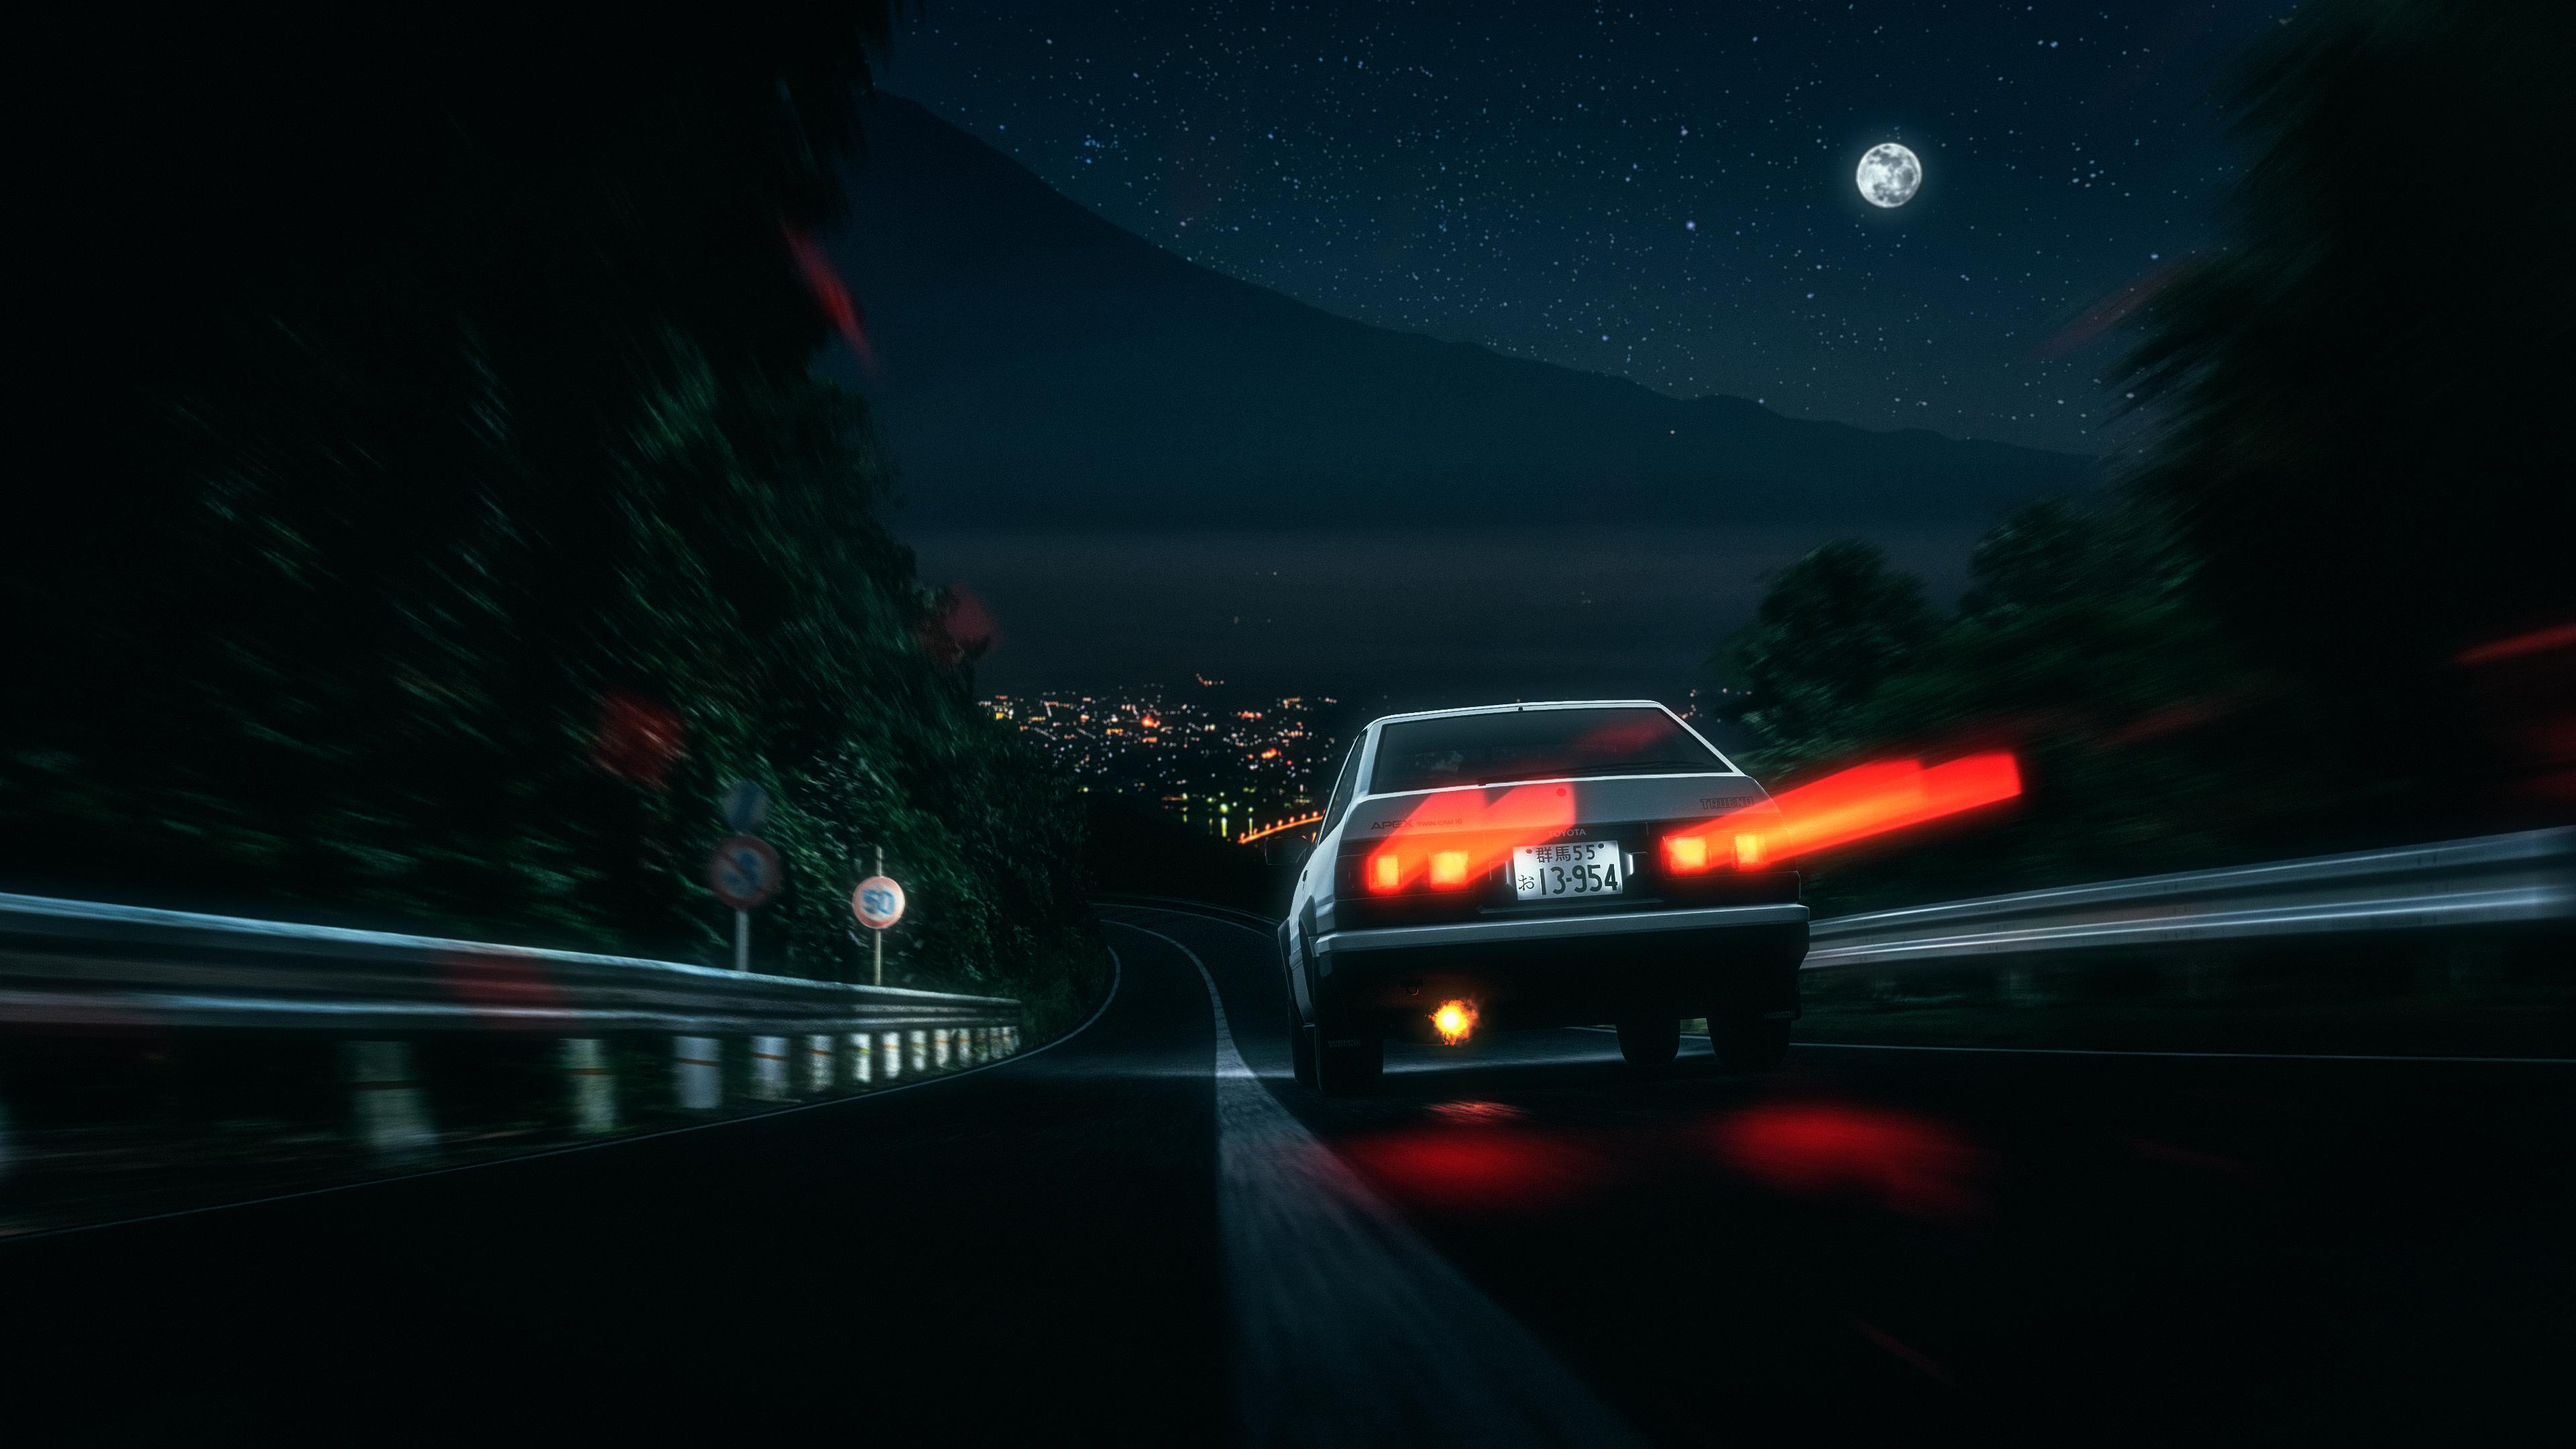  Initial  D  Wallpapers Top Free Initial  D  Backgrounds 